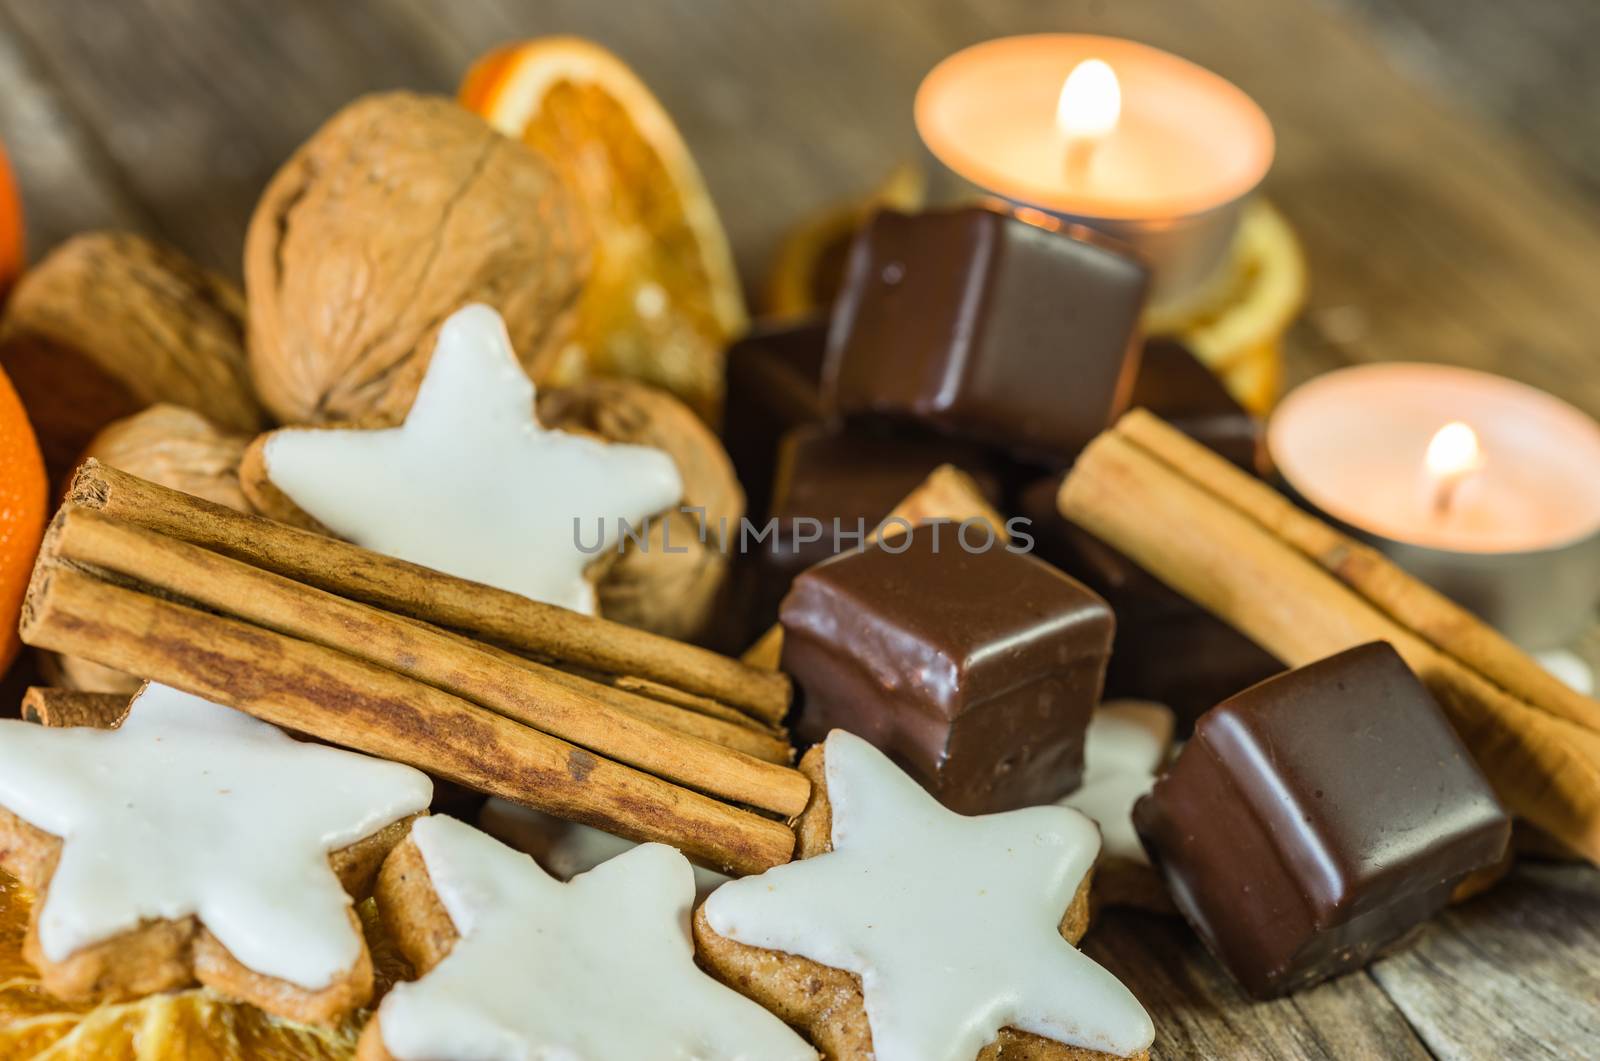 Christmas star shape cookies, chocolate, nuts, cinnamon and candles on wooden table